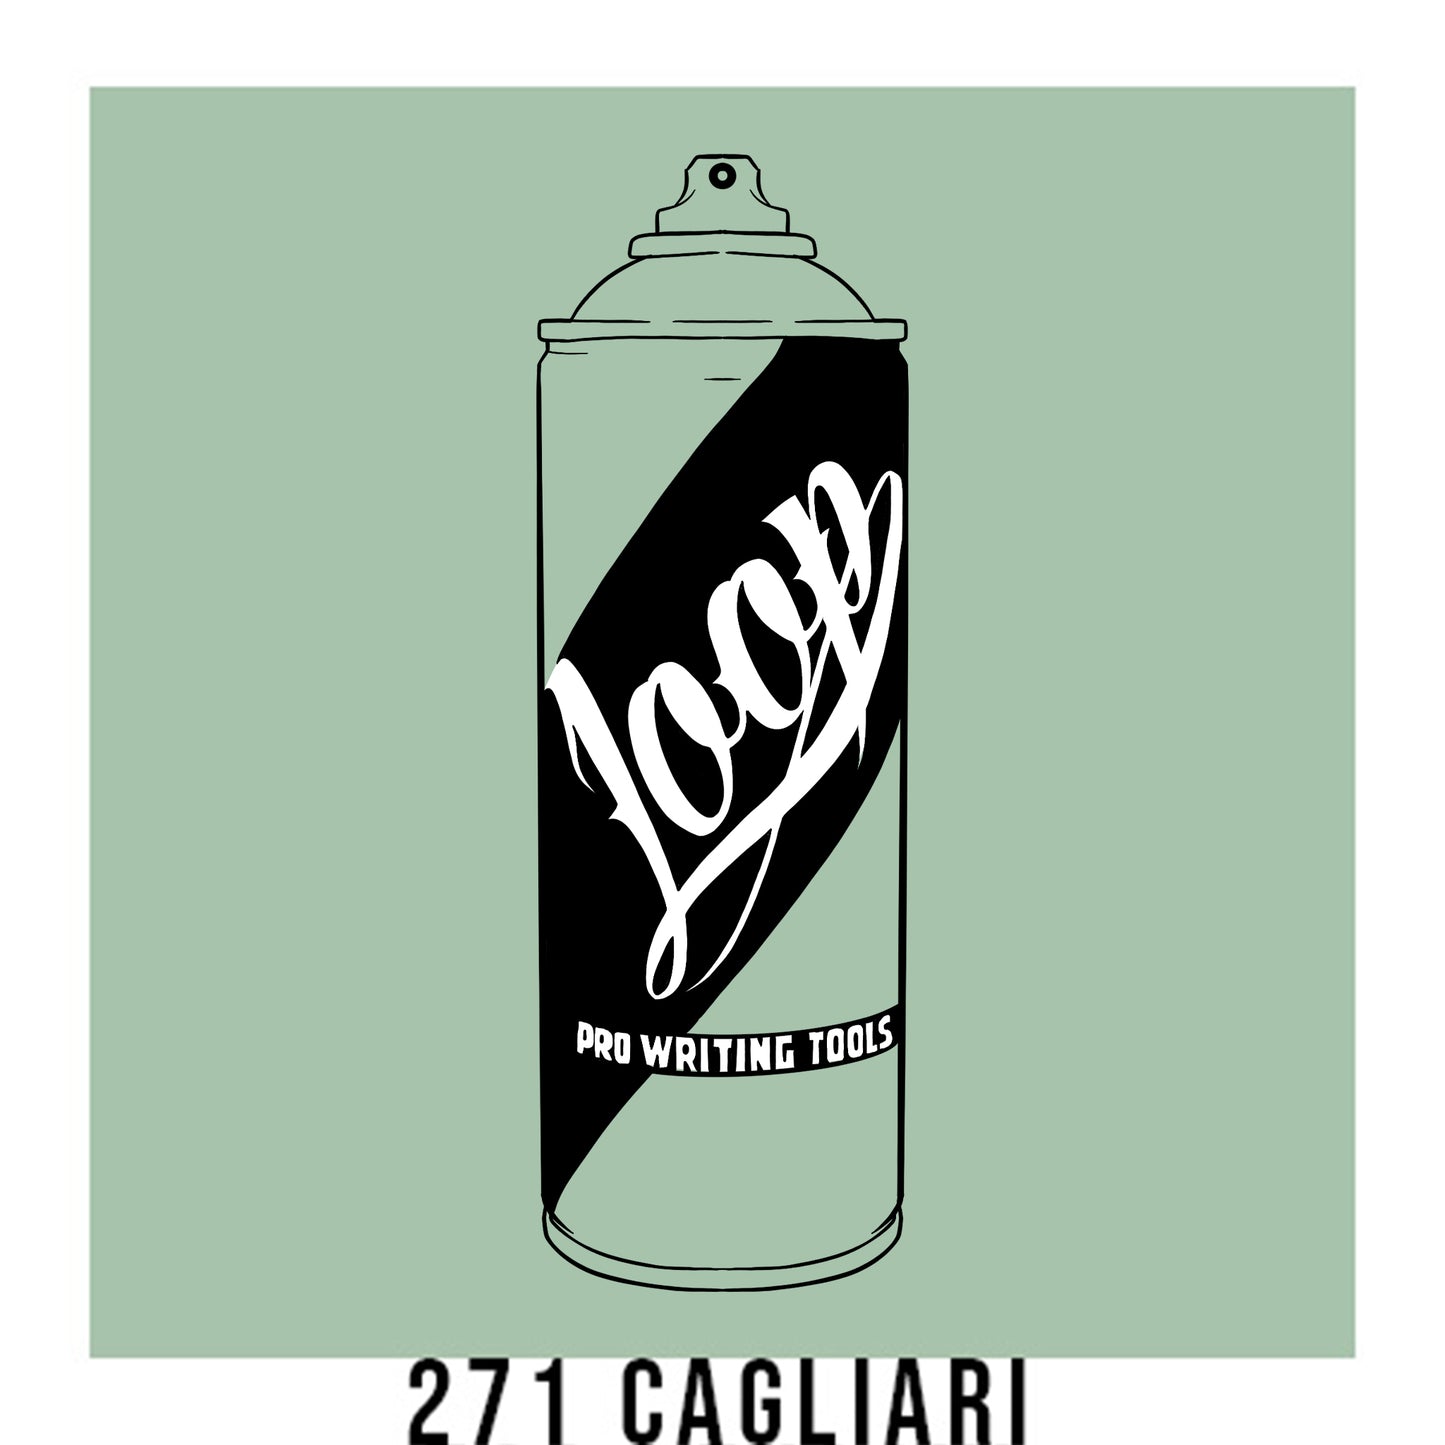 A black outline drawing of a Mint Green spray paint can with the word "Loop" written on the face in script. The background is a color swatch of the same mint Green with a white border with the words "271 Cagliari" at the bottom.